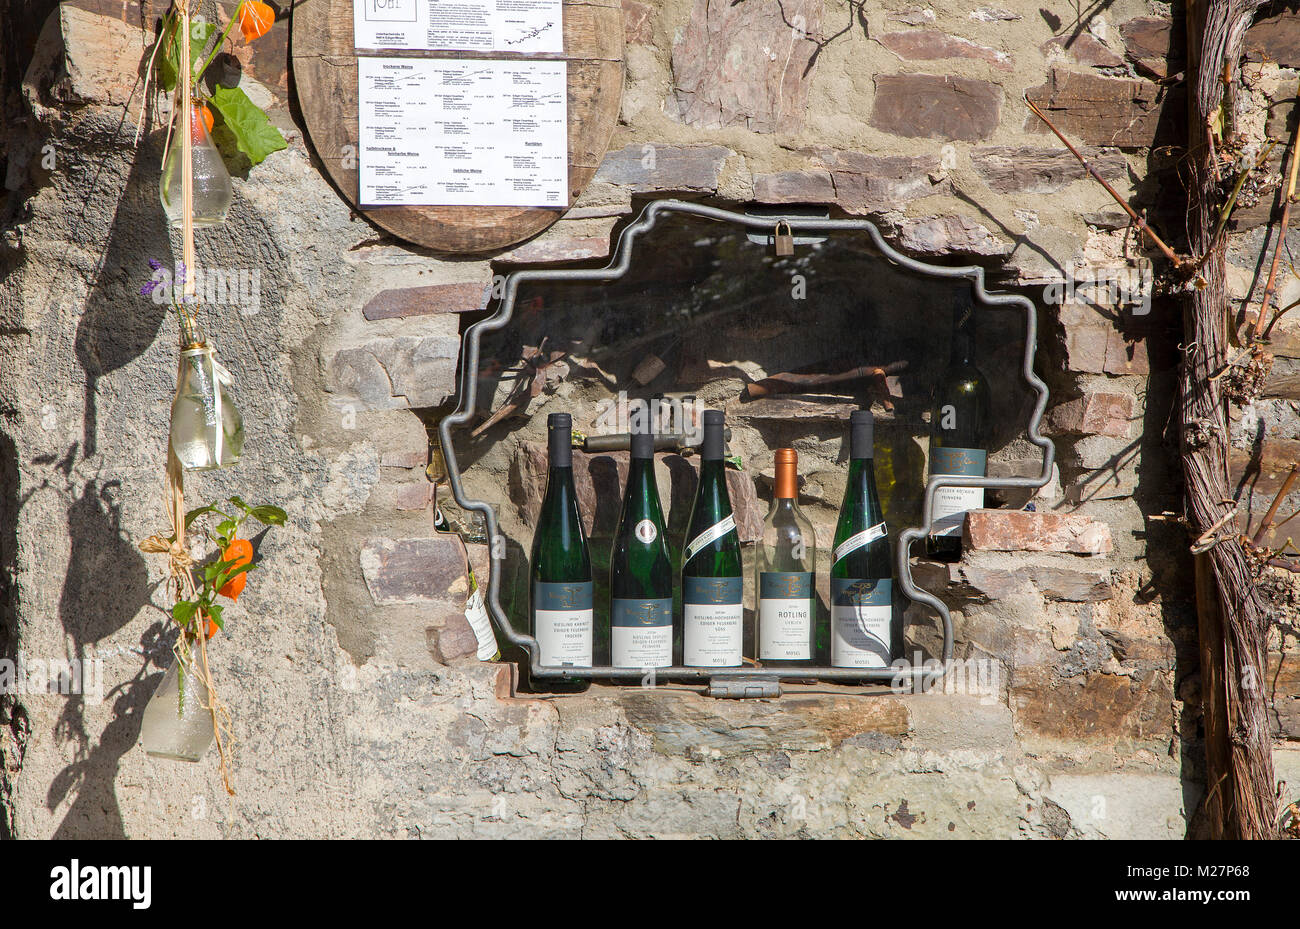 Wine sortiment in a hole of a mural (house wall), wine villag Ediger-Eller, Moselle river, Rhineland-Palatinate, Germany, Europe Stock Photo